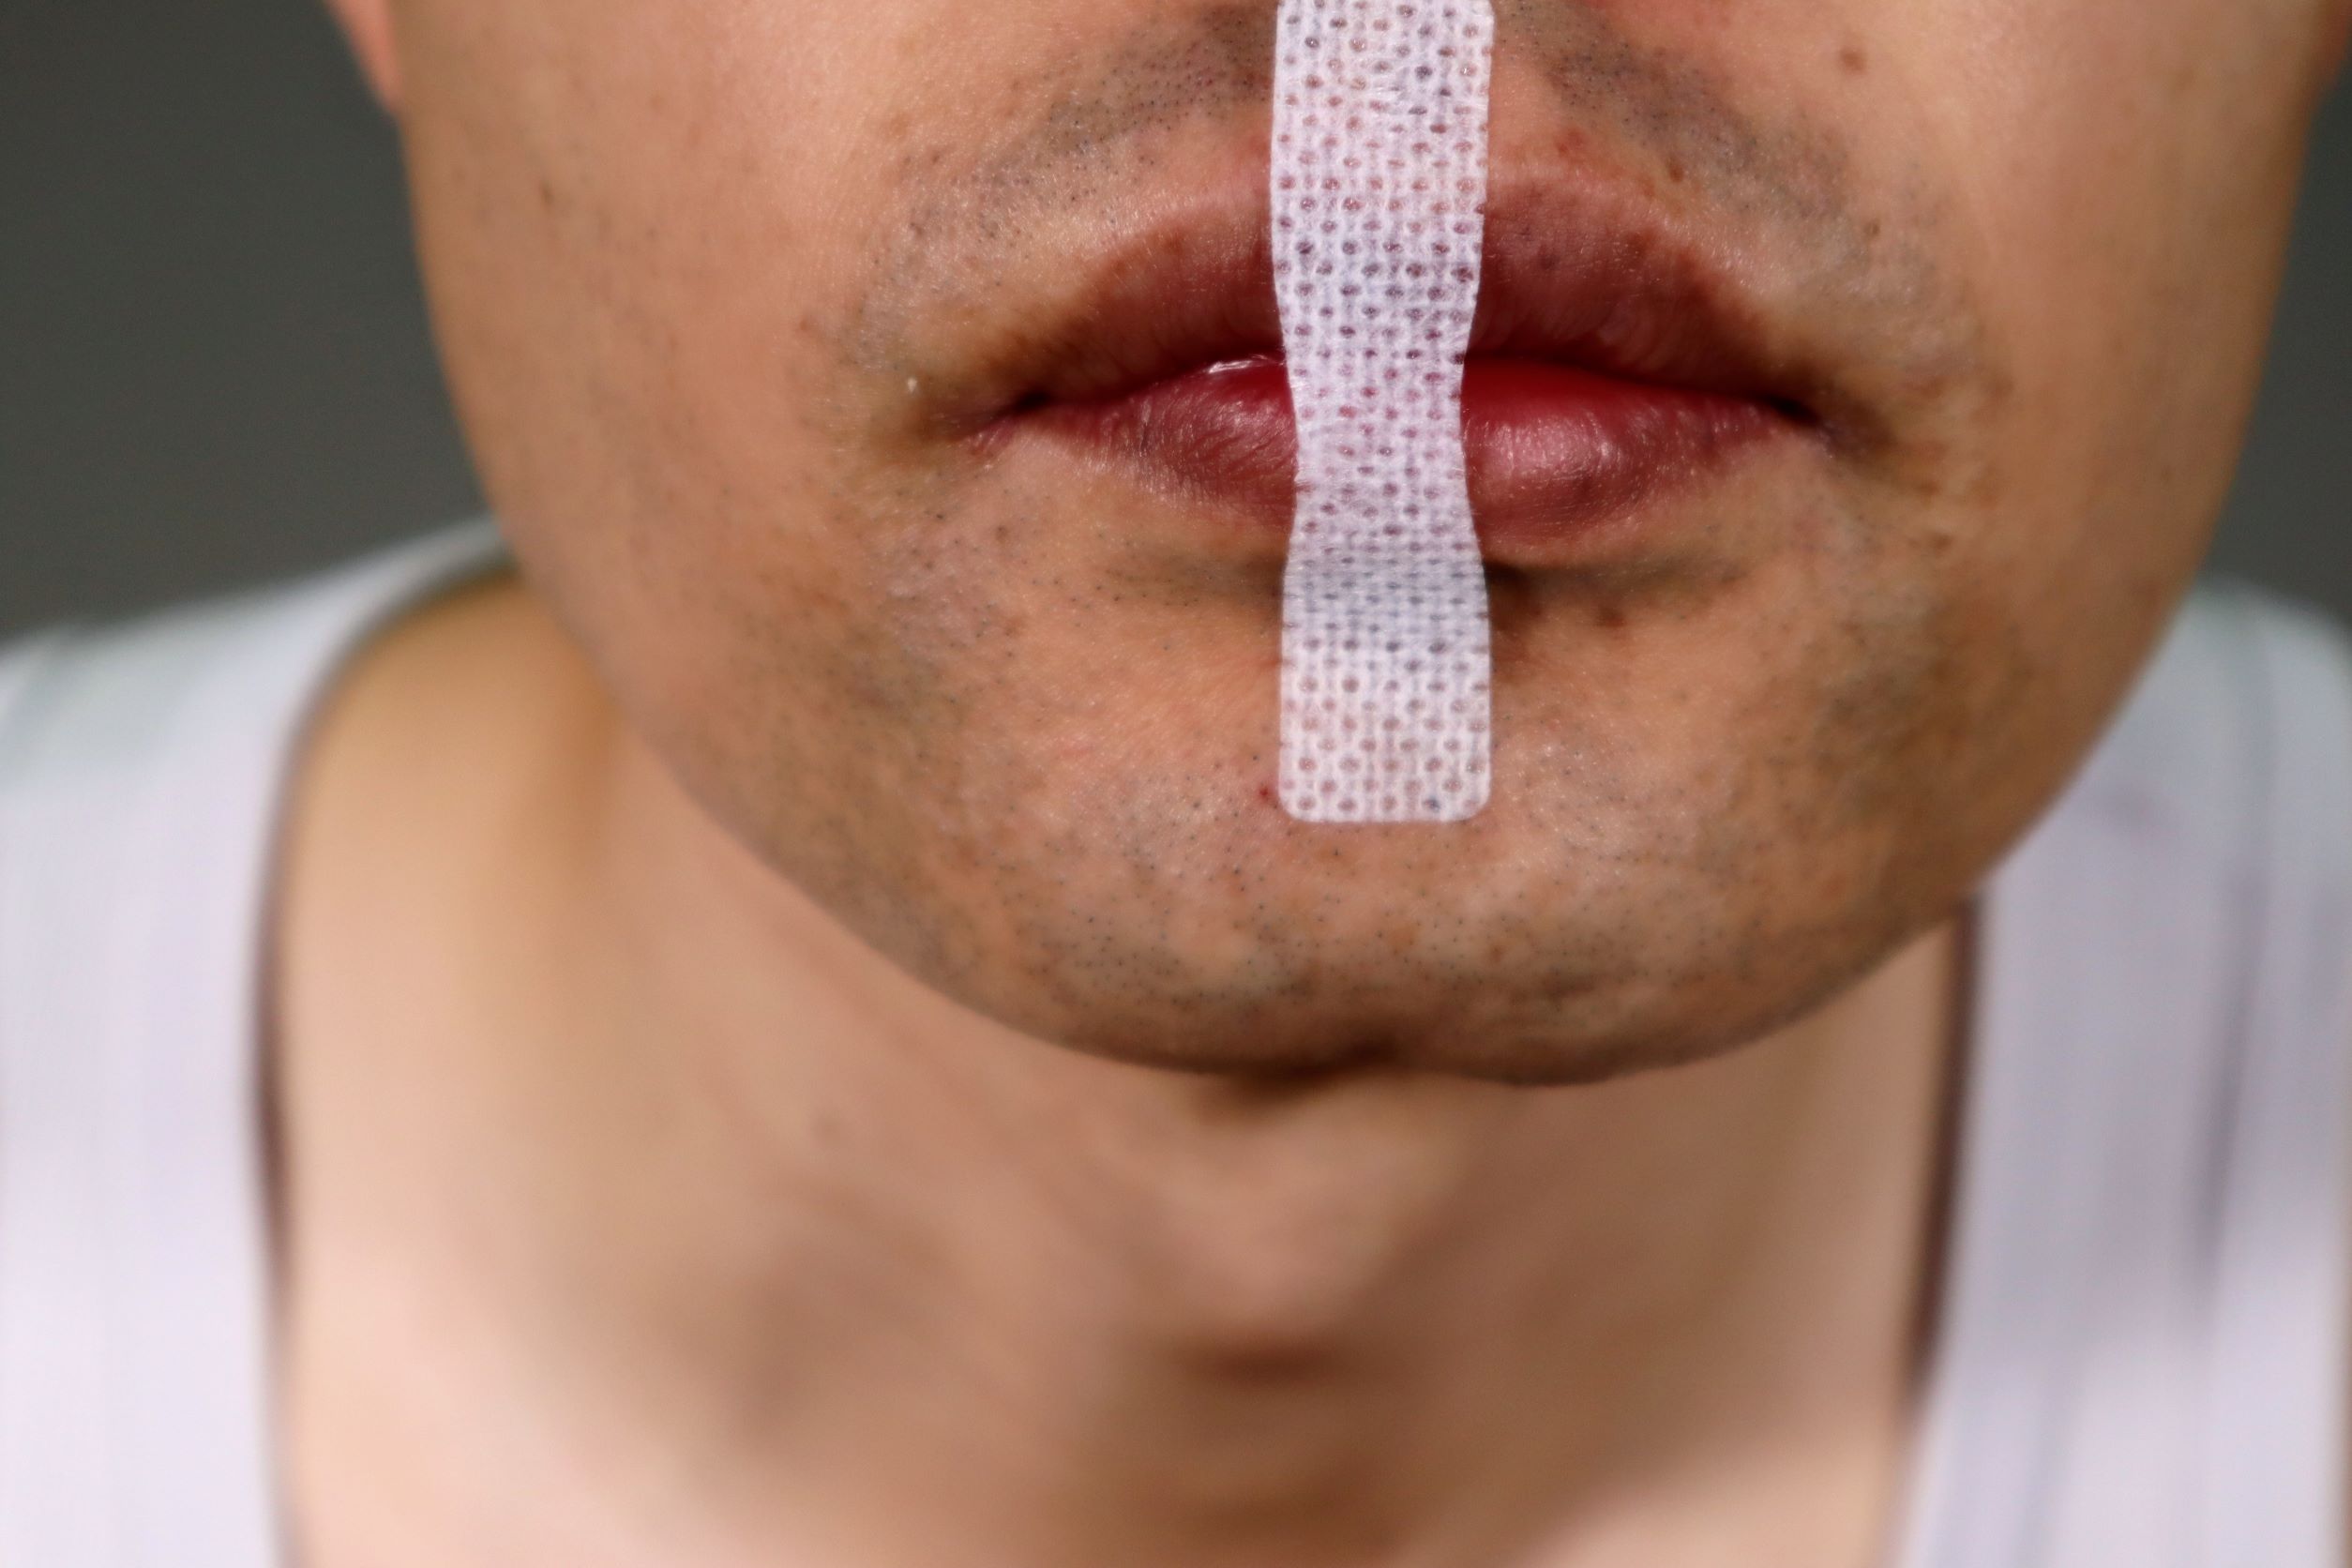 Is it safe to use mouth tape for sleeping?